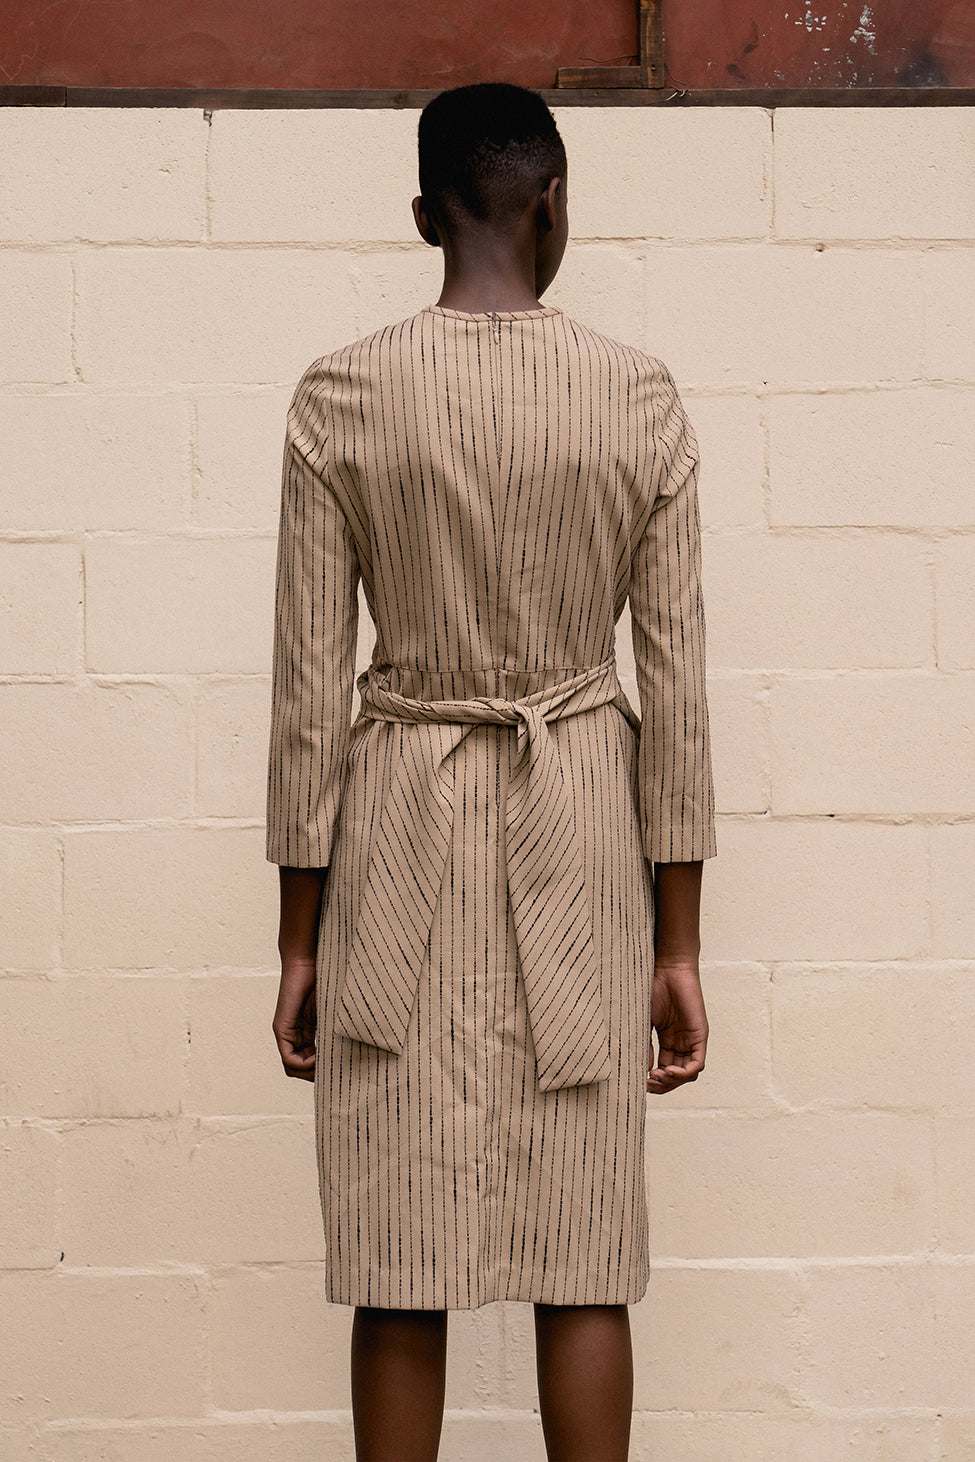 The Lorraine dress featuring round neckline, three-quarter sleeves, gathered pleats at front with self-tie. Concealed zip closure at back. Unlined. Mid-length. 